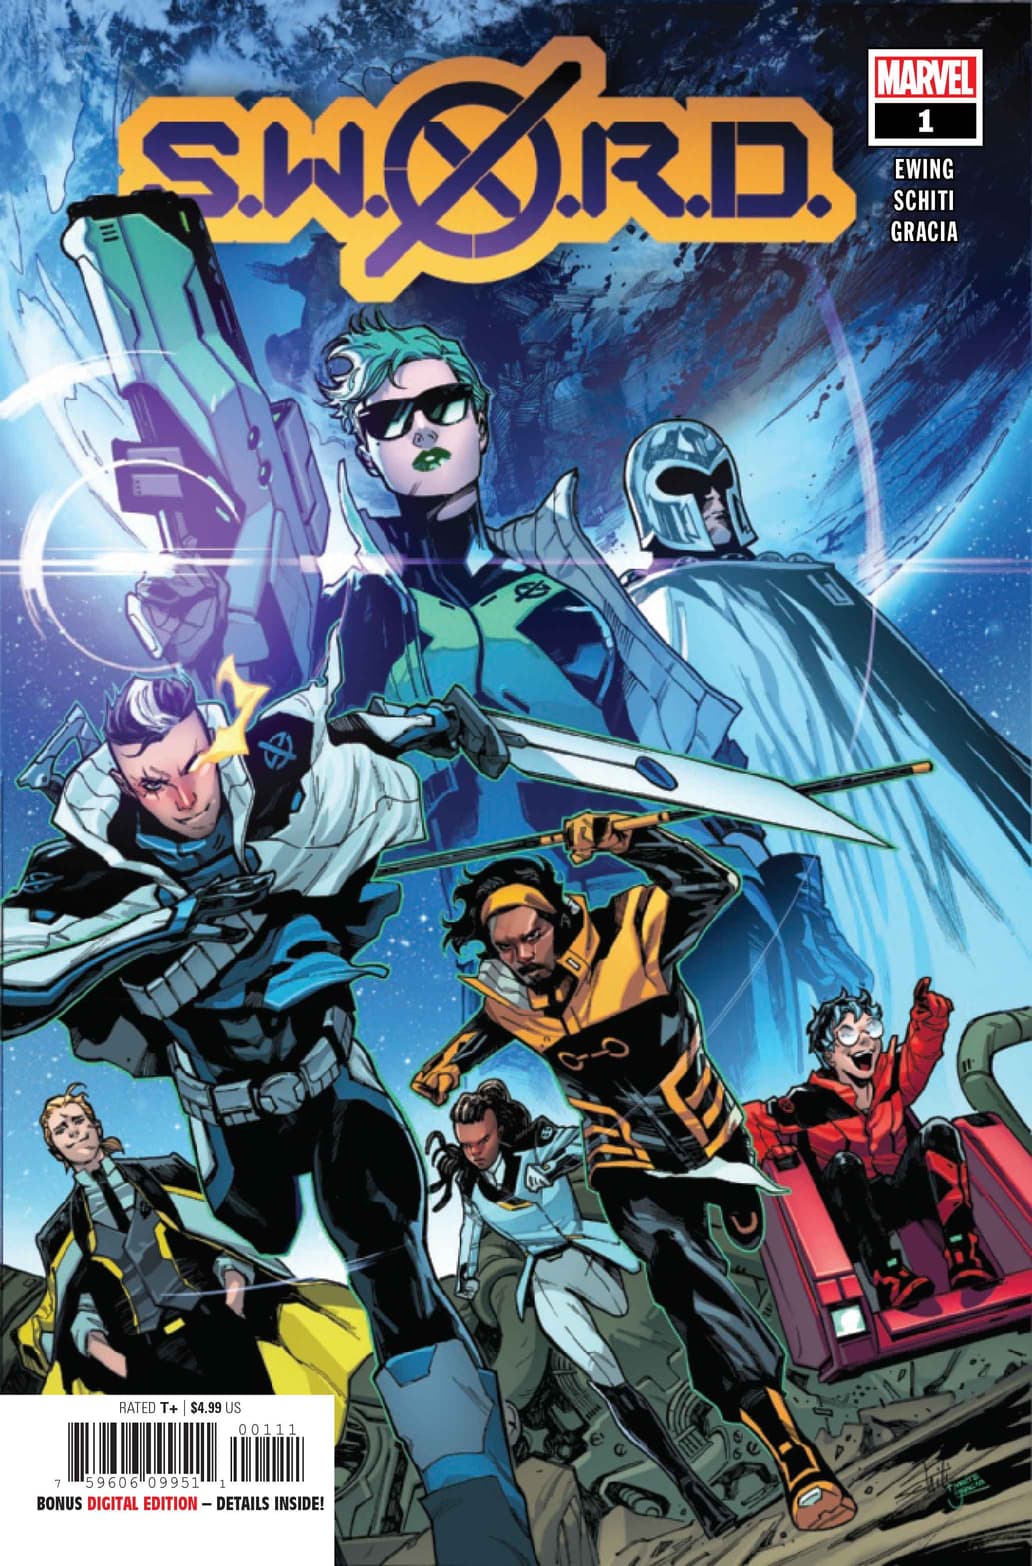 S.W.O.R.D. #1 cover